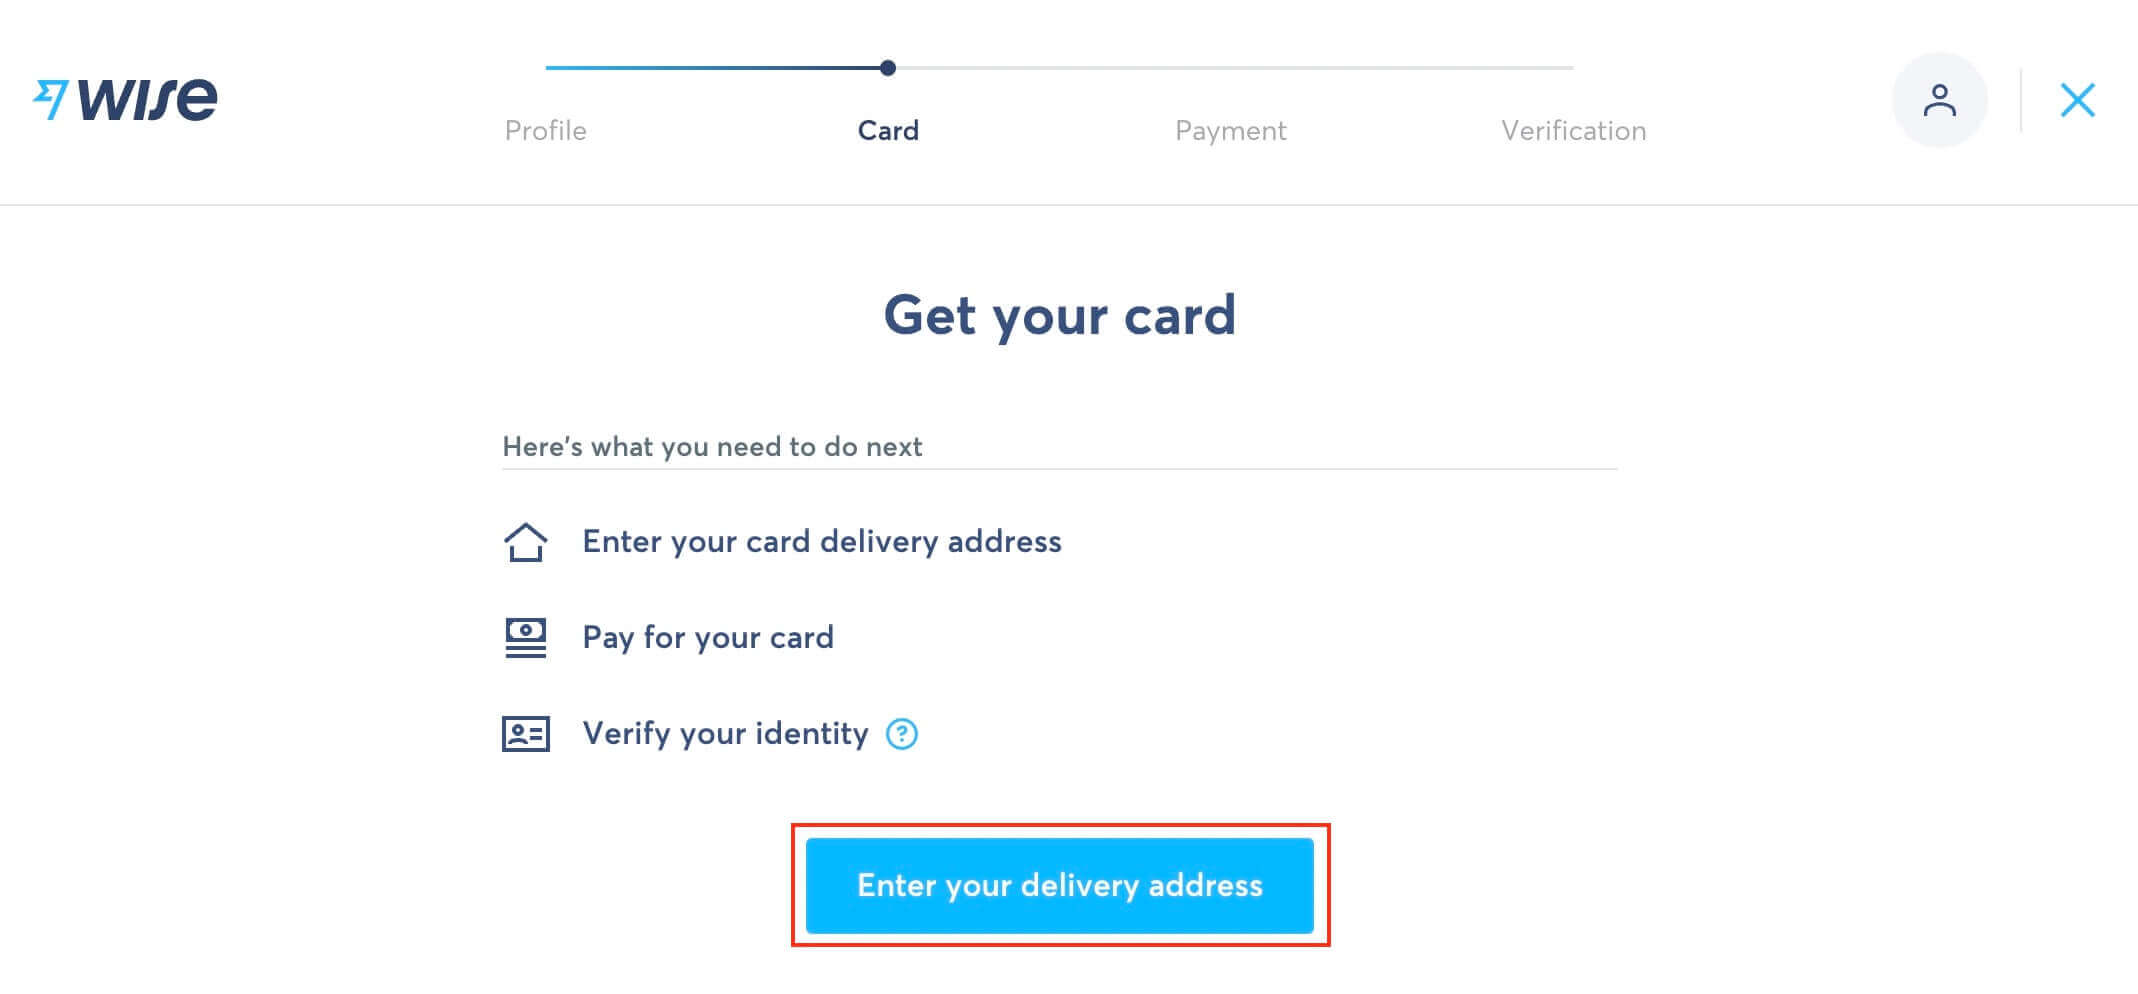 Wise：青いボタン『Enter your delivery address』をクリック